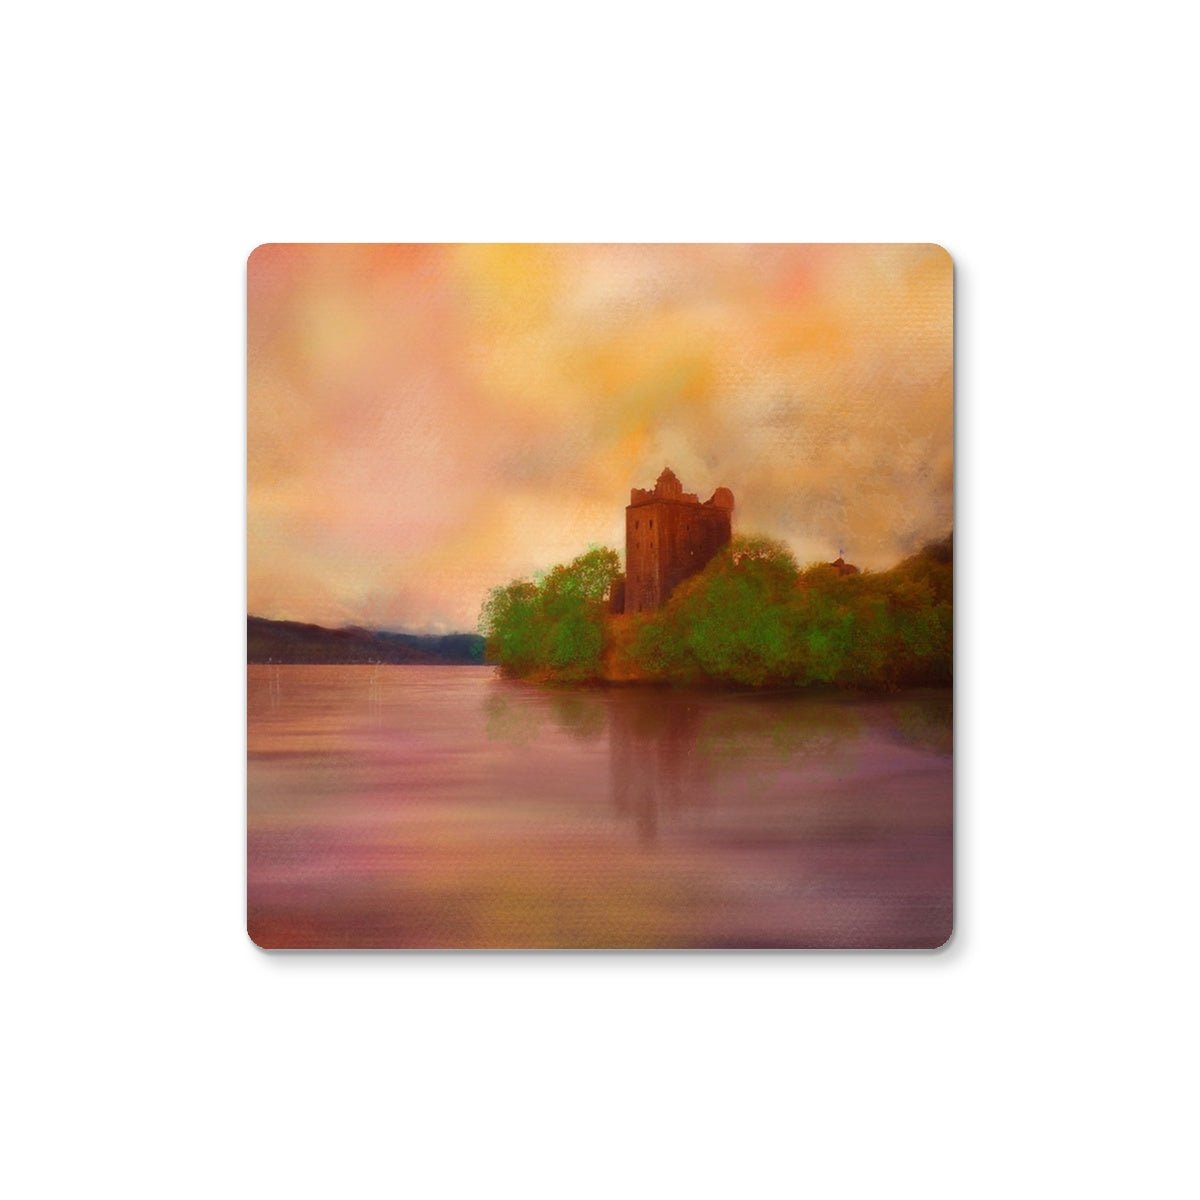 Urquhart Castle Art Gifts Coaster-Coasters-Historic & Iconic Scotland Art Gallery-Single Coaster-Paintings, Prints, Homeware, Art Gifts From Scotland By Scottish Artist Kevin Hunter